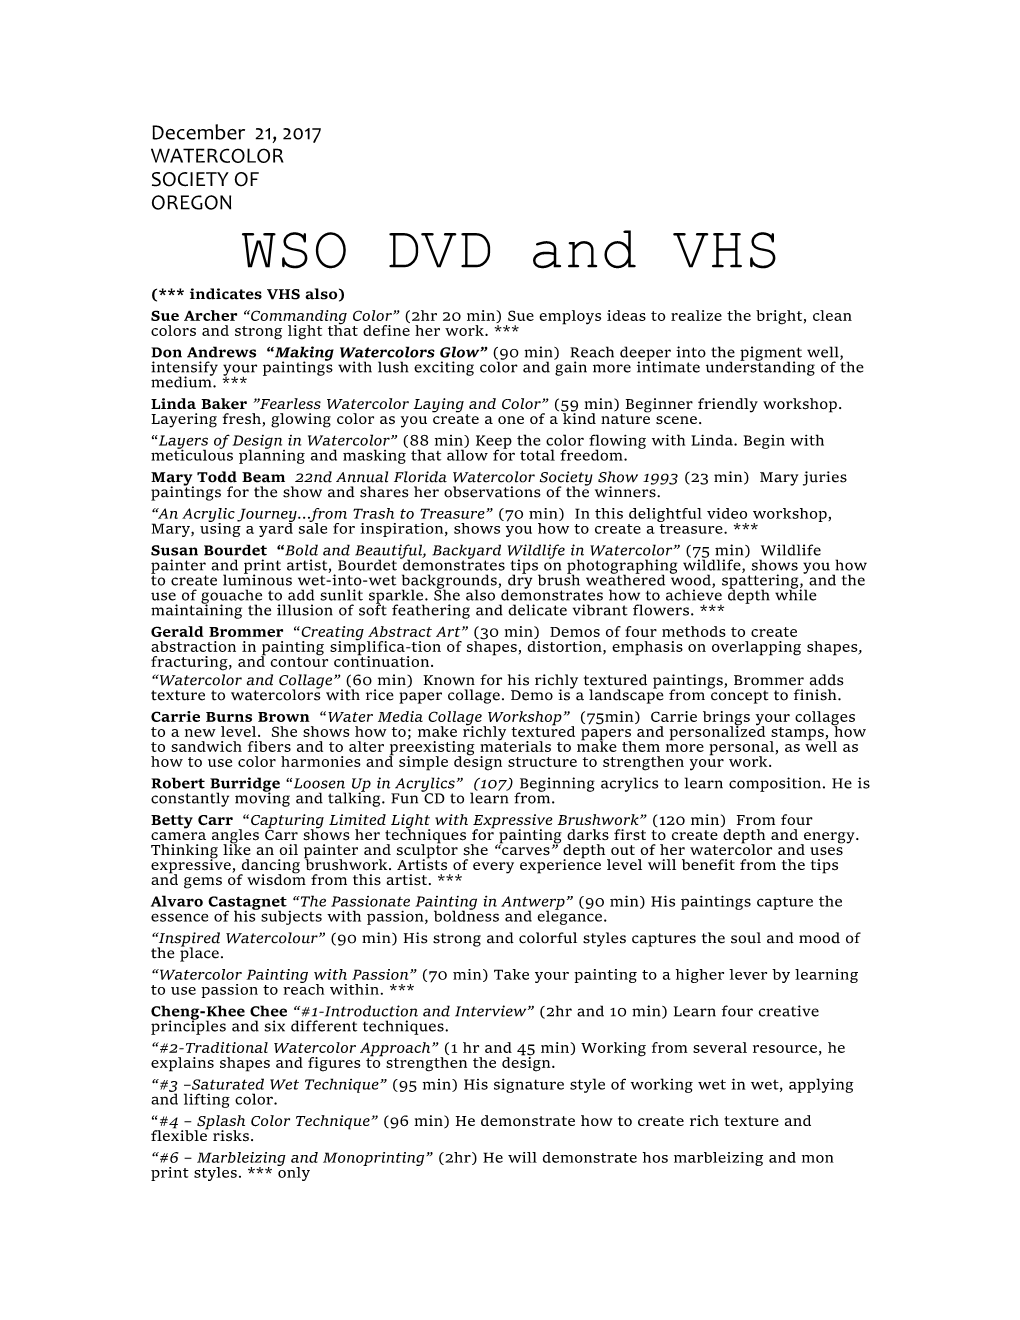 WSO DVD and VHS